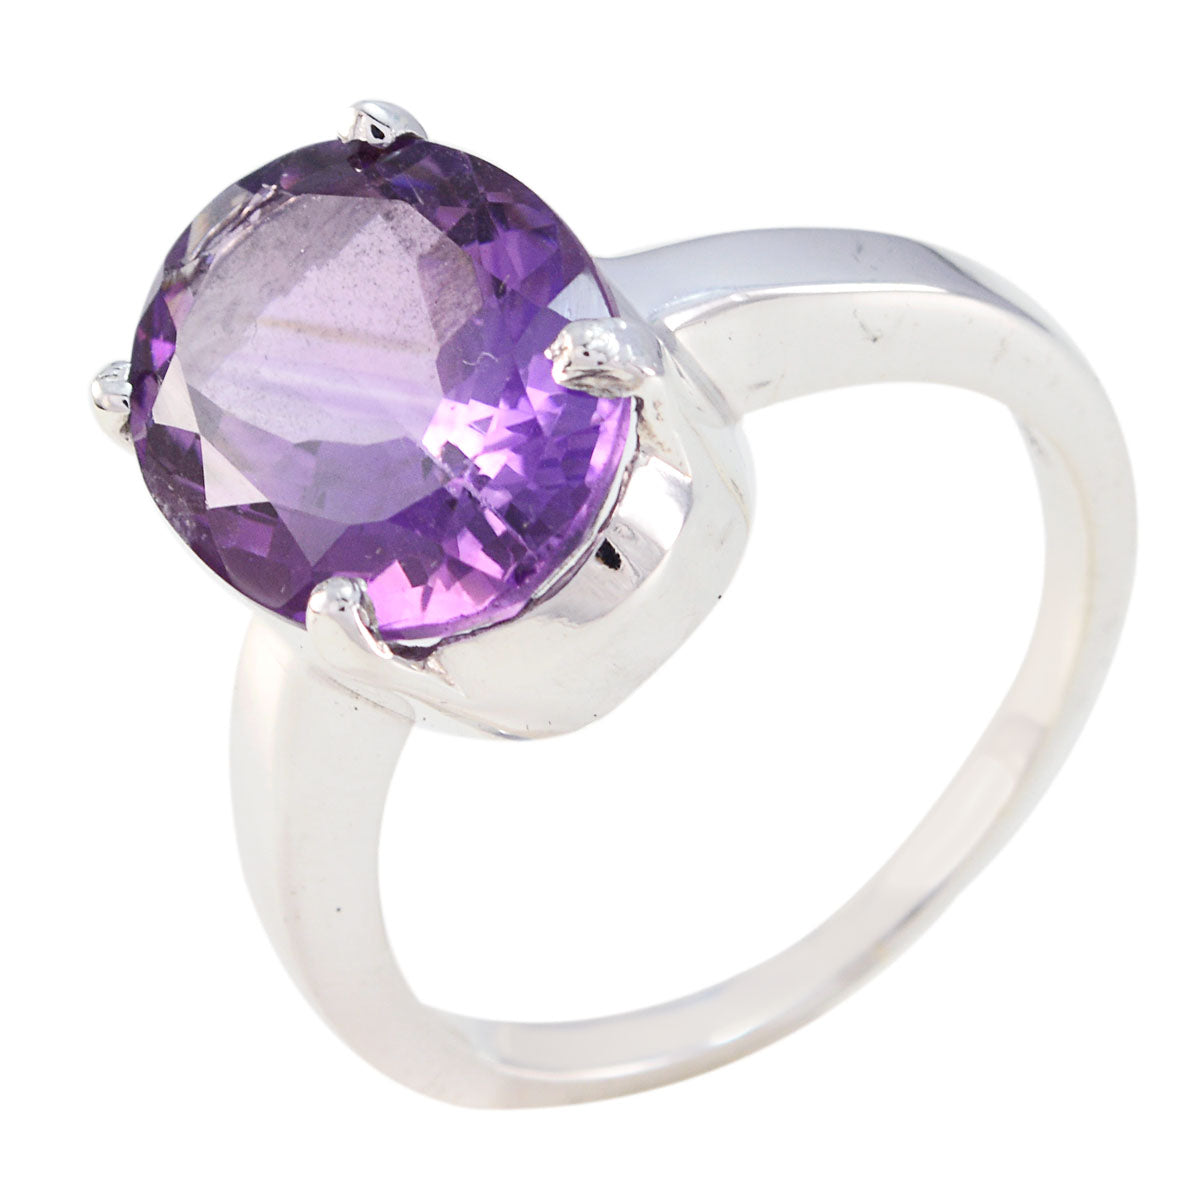 Handsome Gems Amethyst 925 Sterling Silver Rings Antique Jewelry